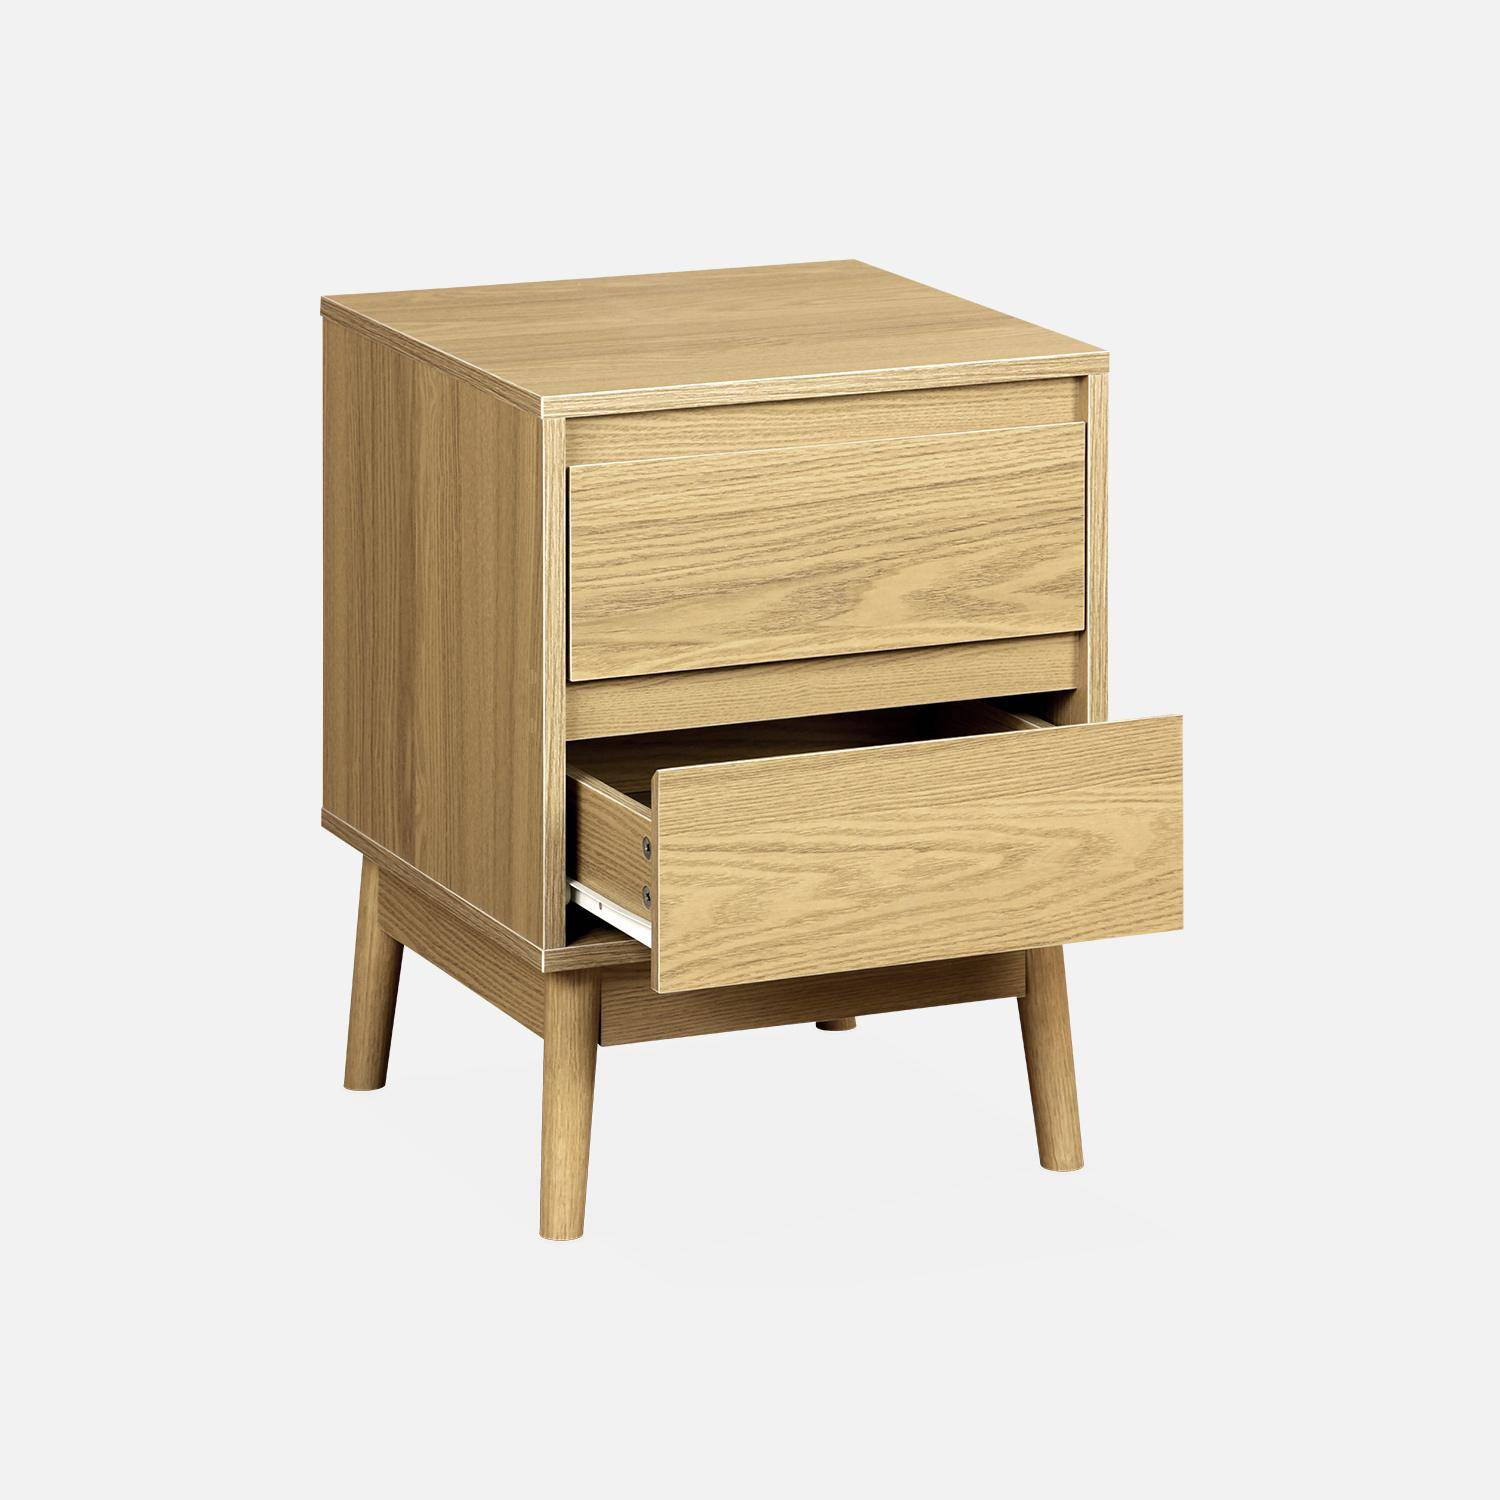 Pair of bedside tables with 2 drawers, 26x40x56cm - Dune - Natural,sweeek,Photo5